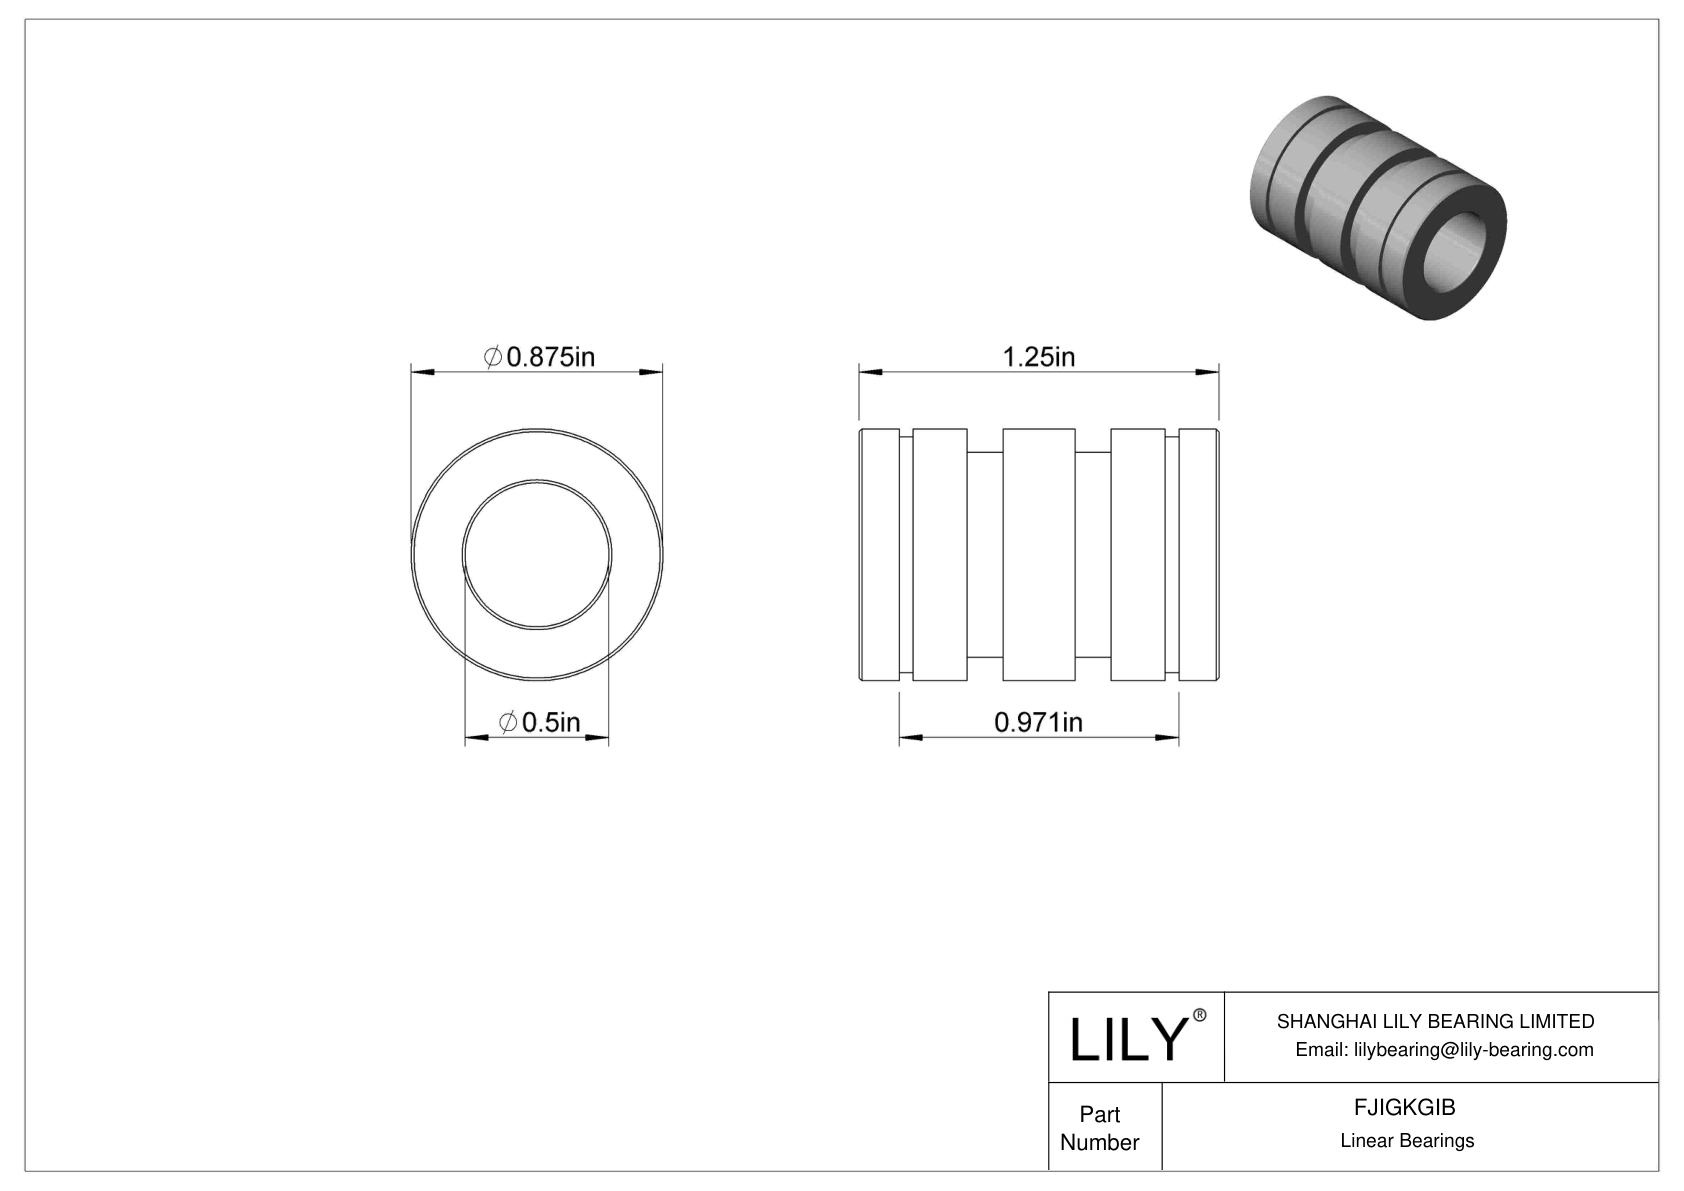 FJIGKGIB Common Linear Sleeve Bearings cad drawing